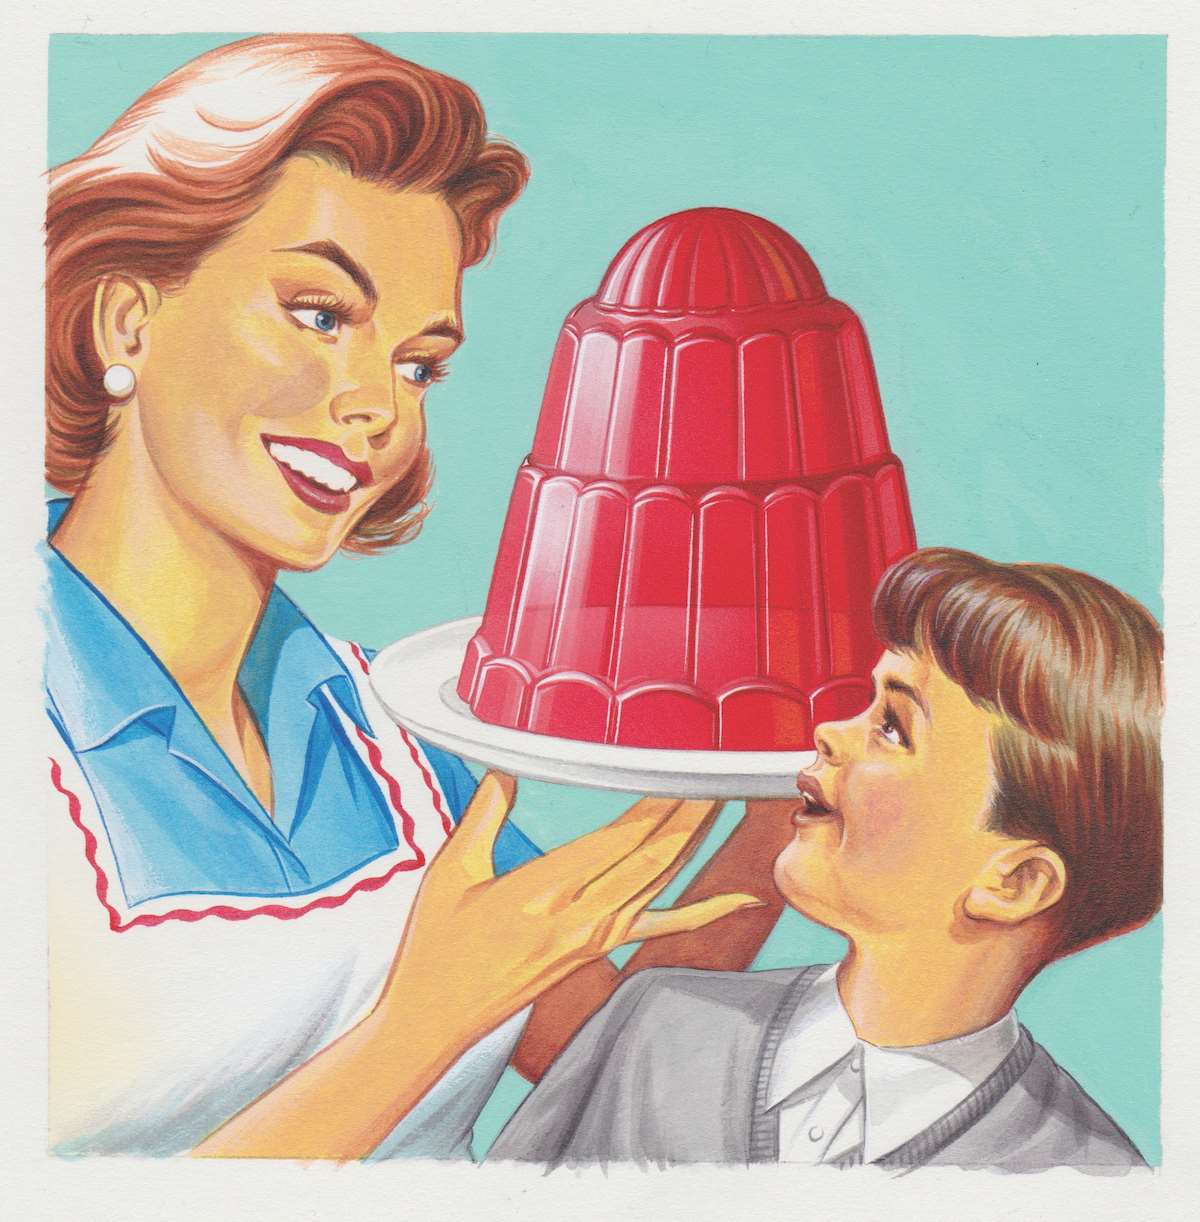 Mark Thomas, hand drawn 1950s mother and son with a jelly. Referencing mid century Norman Rockwell illustrations.